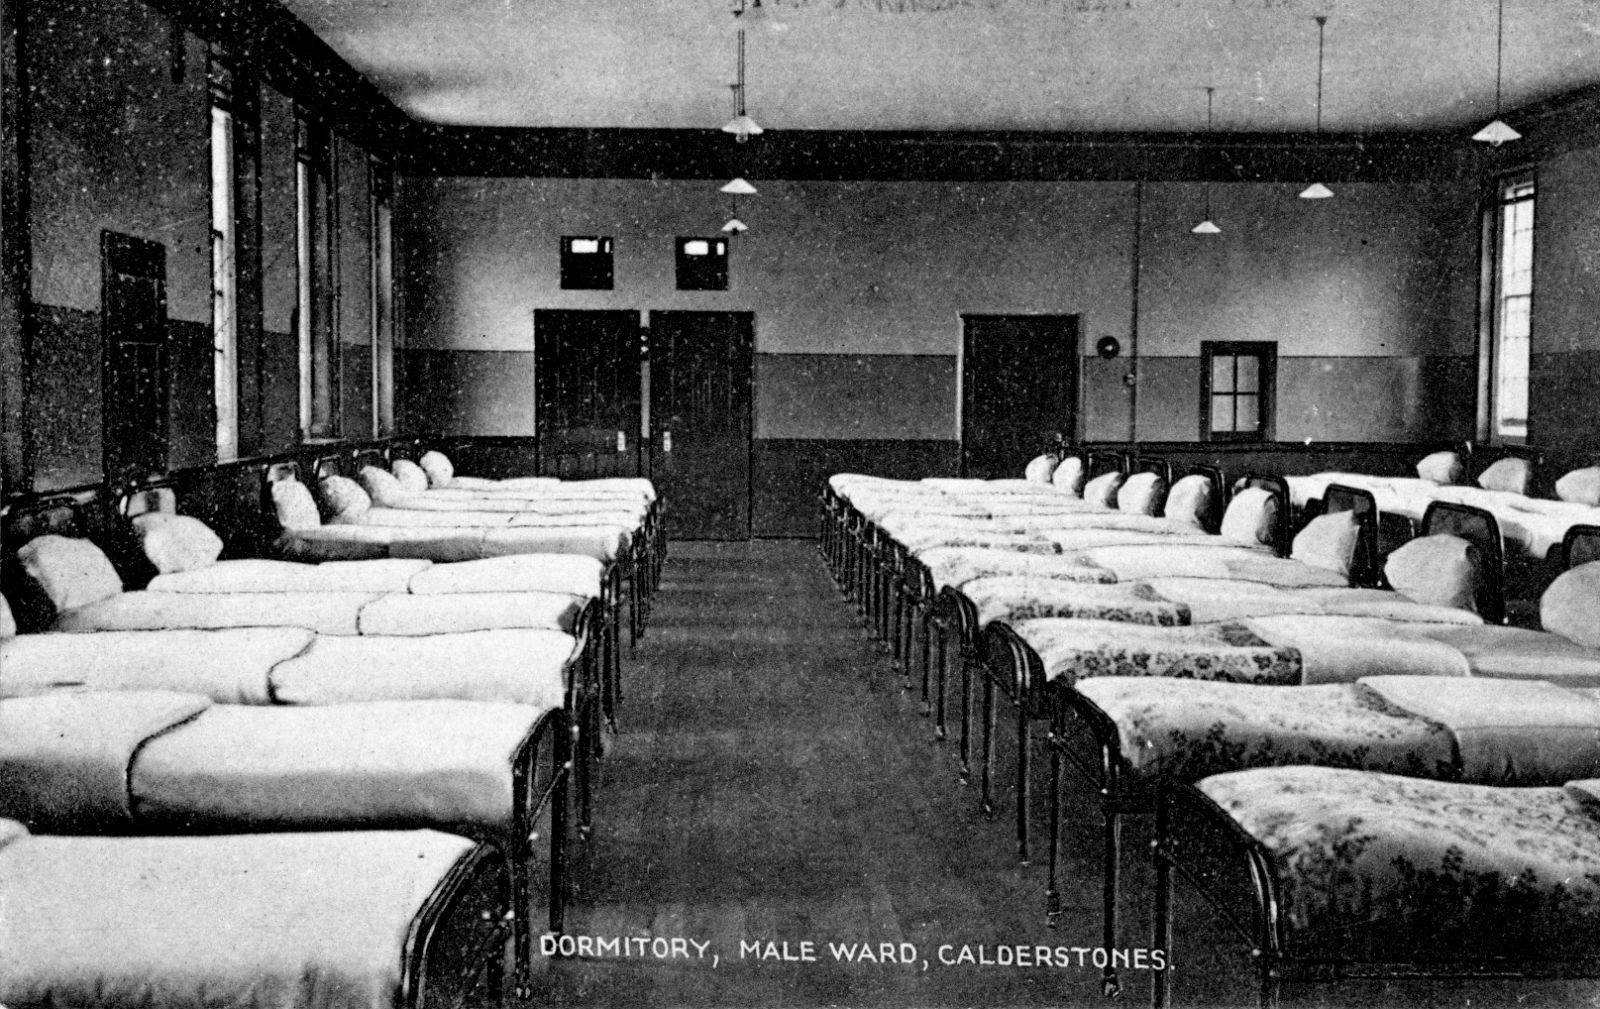 An old black and white photo showing lines of beds in a dorminary